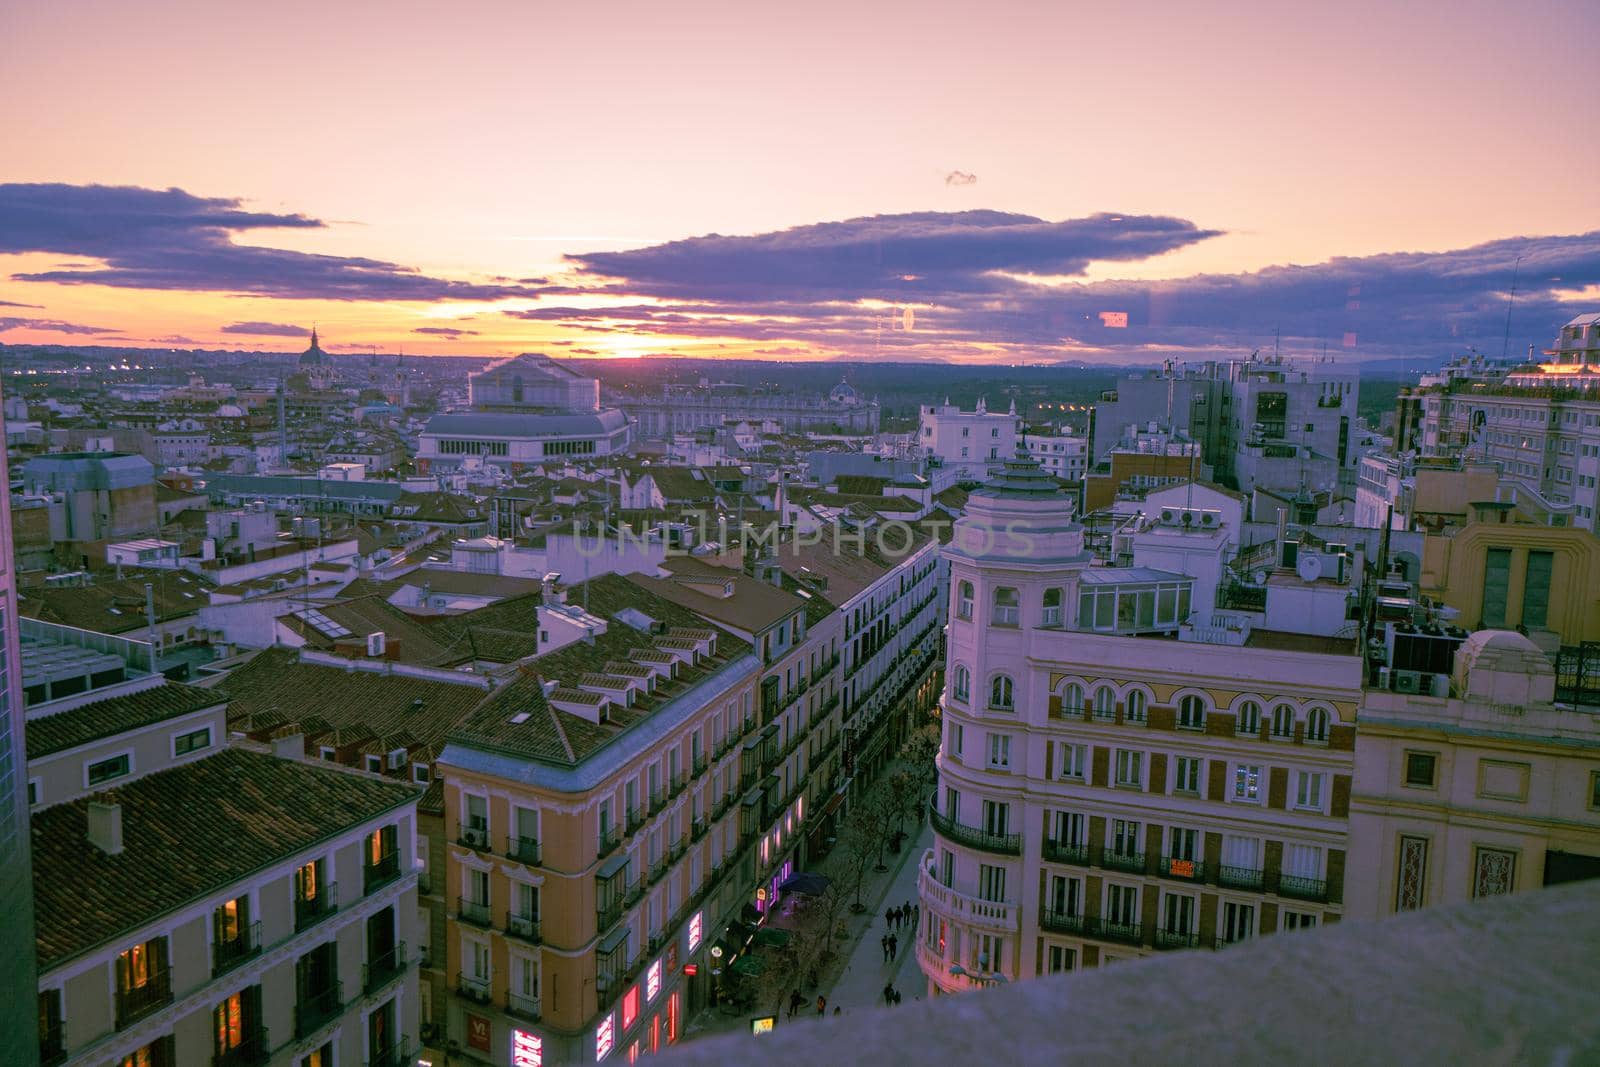 Views of the city of madrid from above by xavier_photo